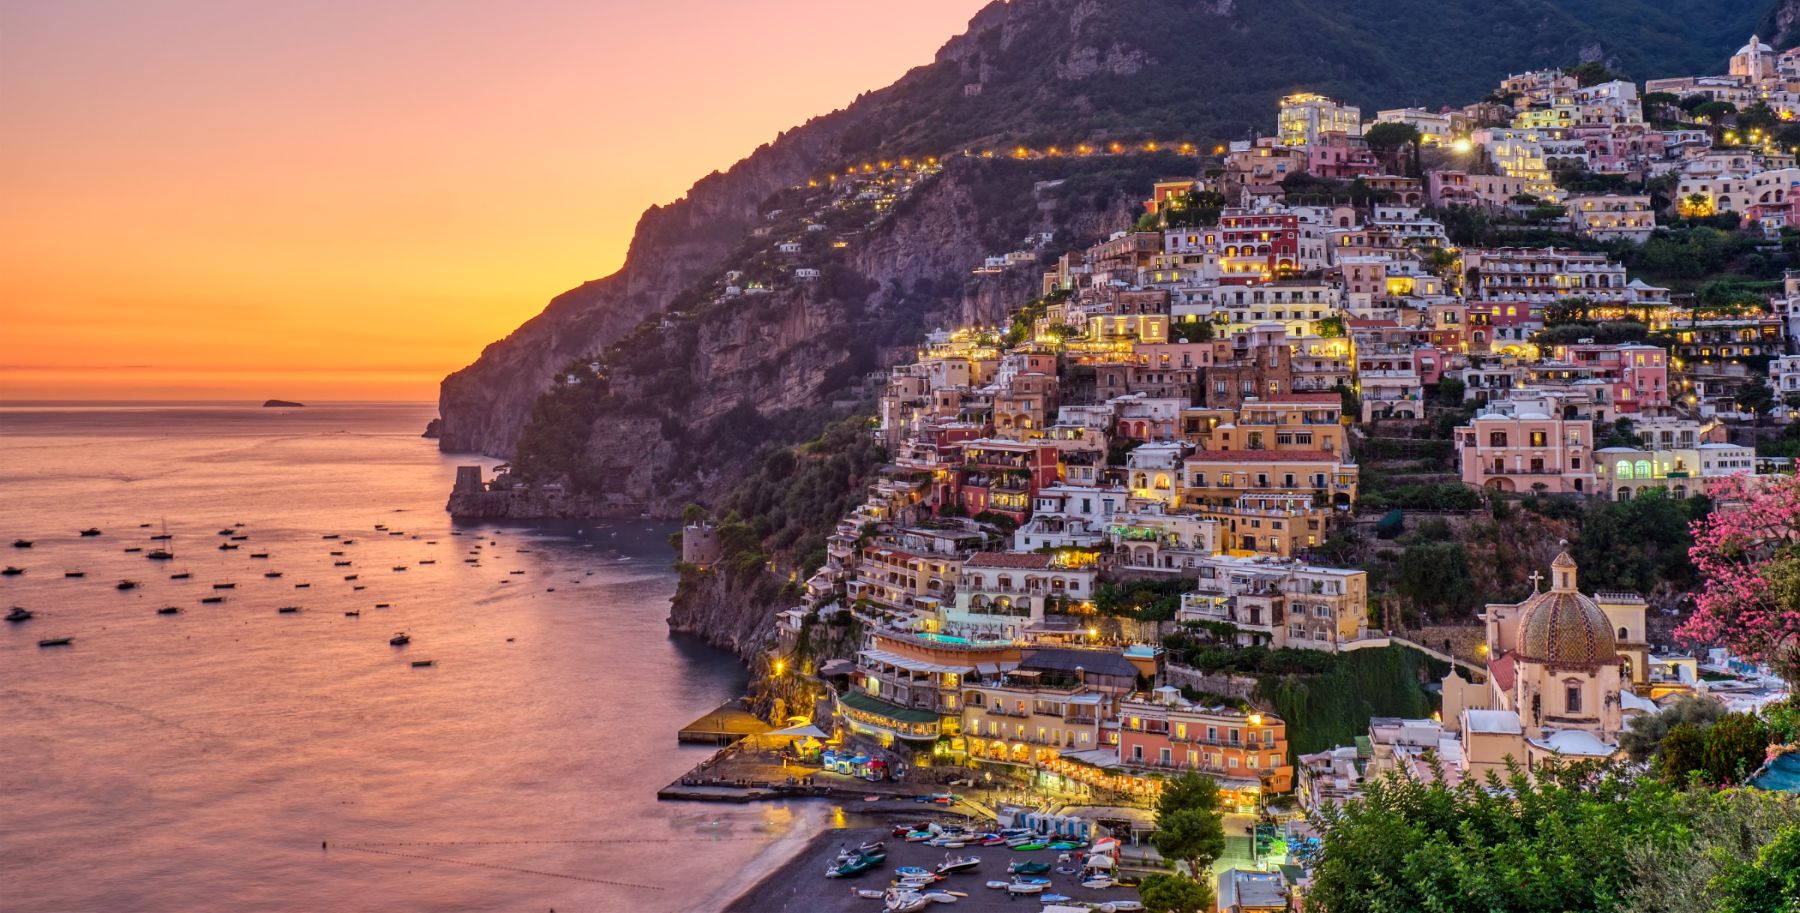 Sunset over a town included in the Amalfi coast itinerary